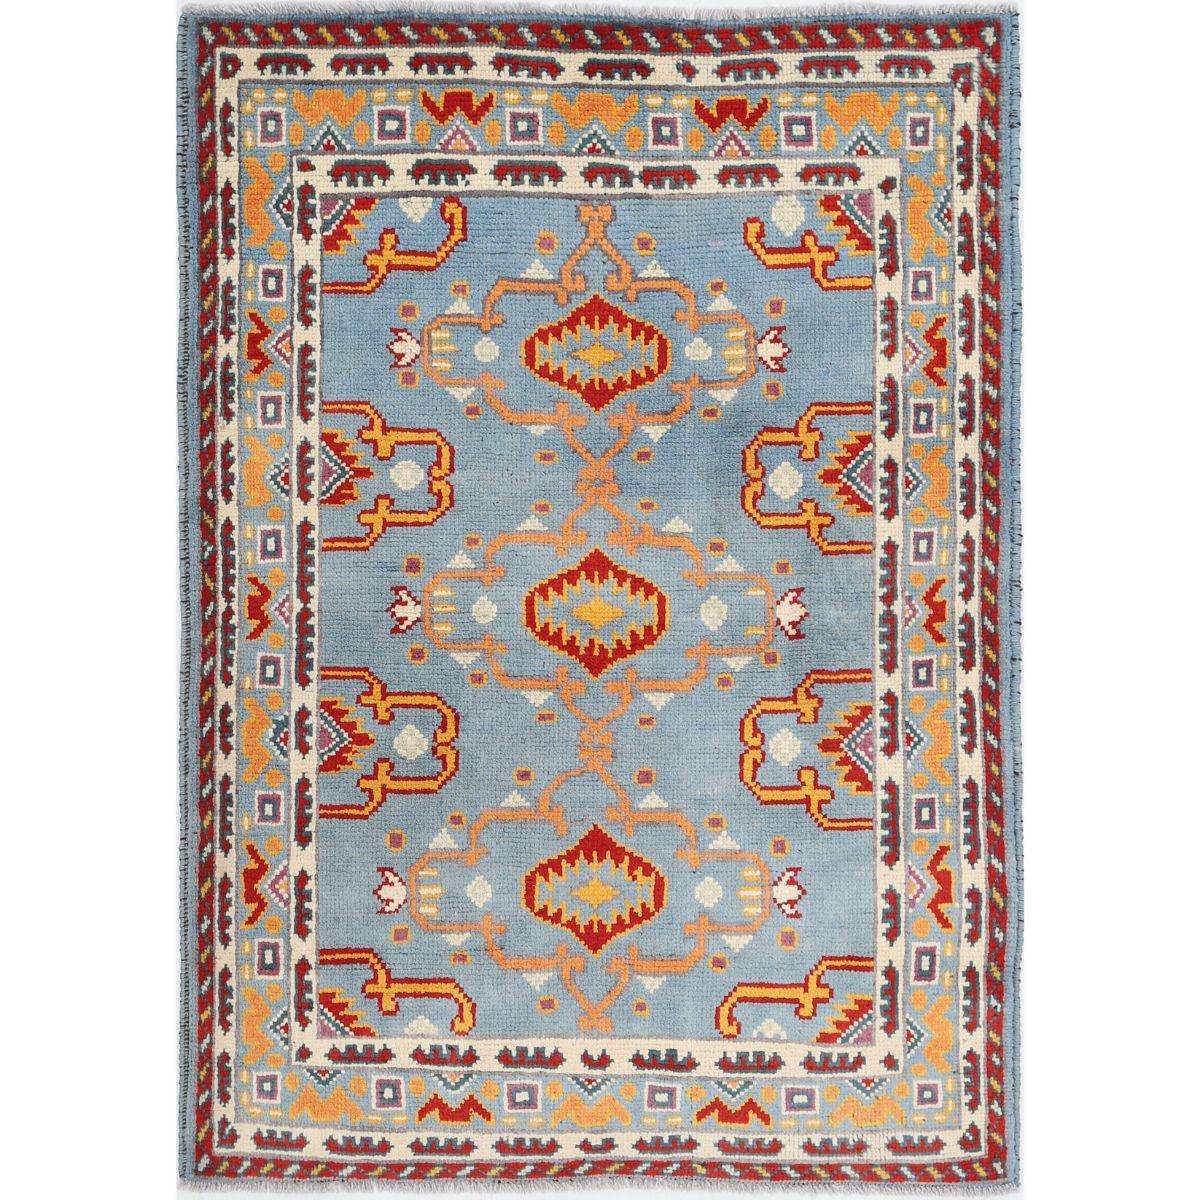 Revival 3' 6" X 4' 11" Wool Hand Knotted Rug